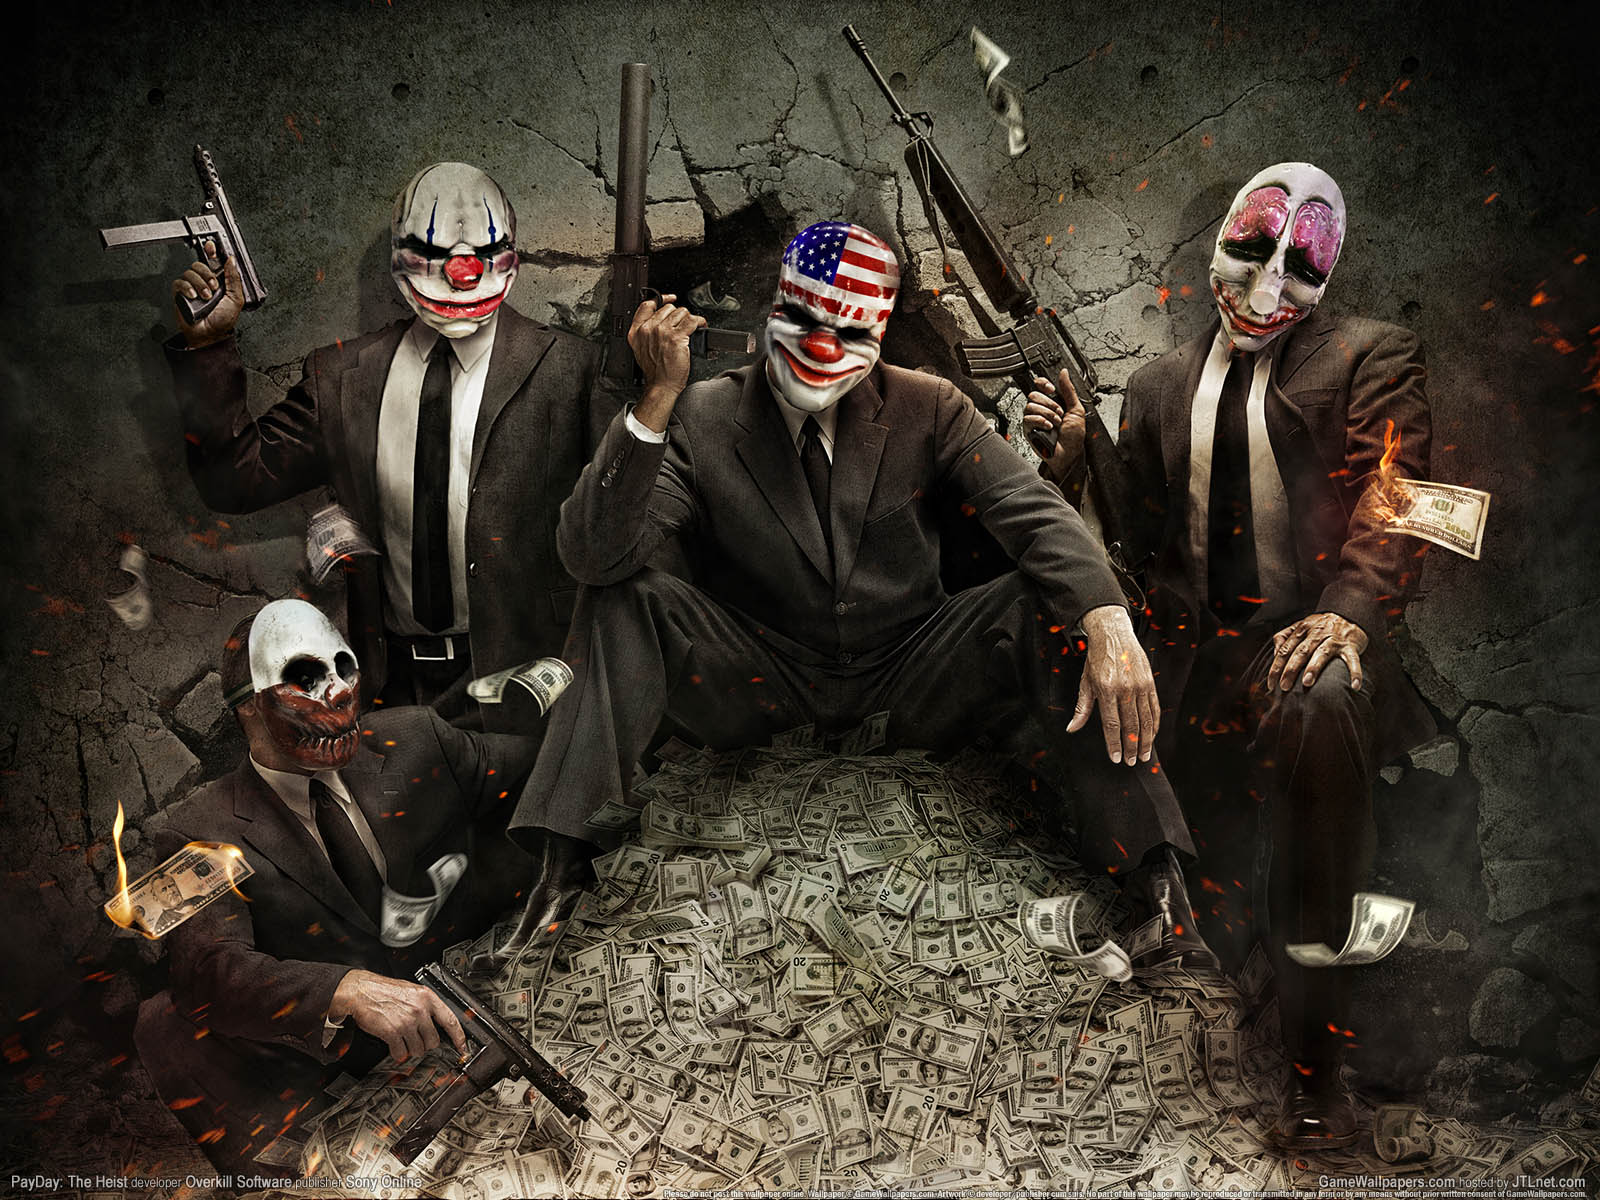 PayDay: The Heist wallpaper 01 1600x1200